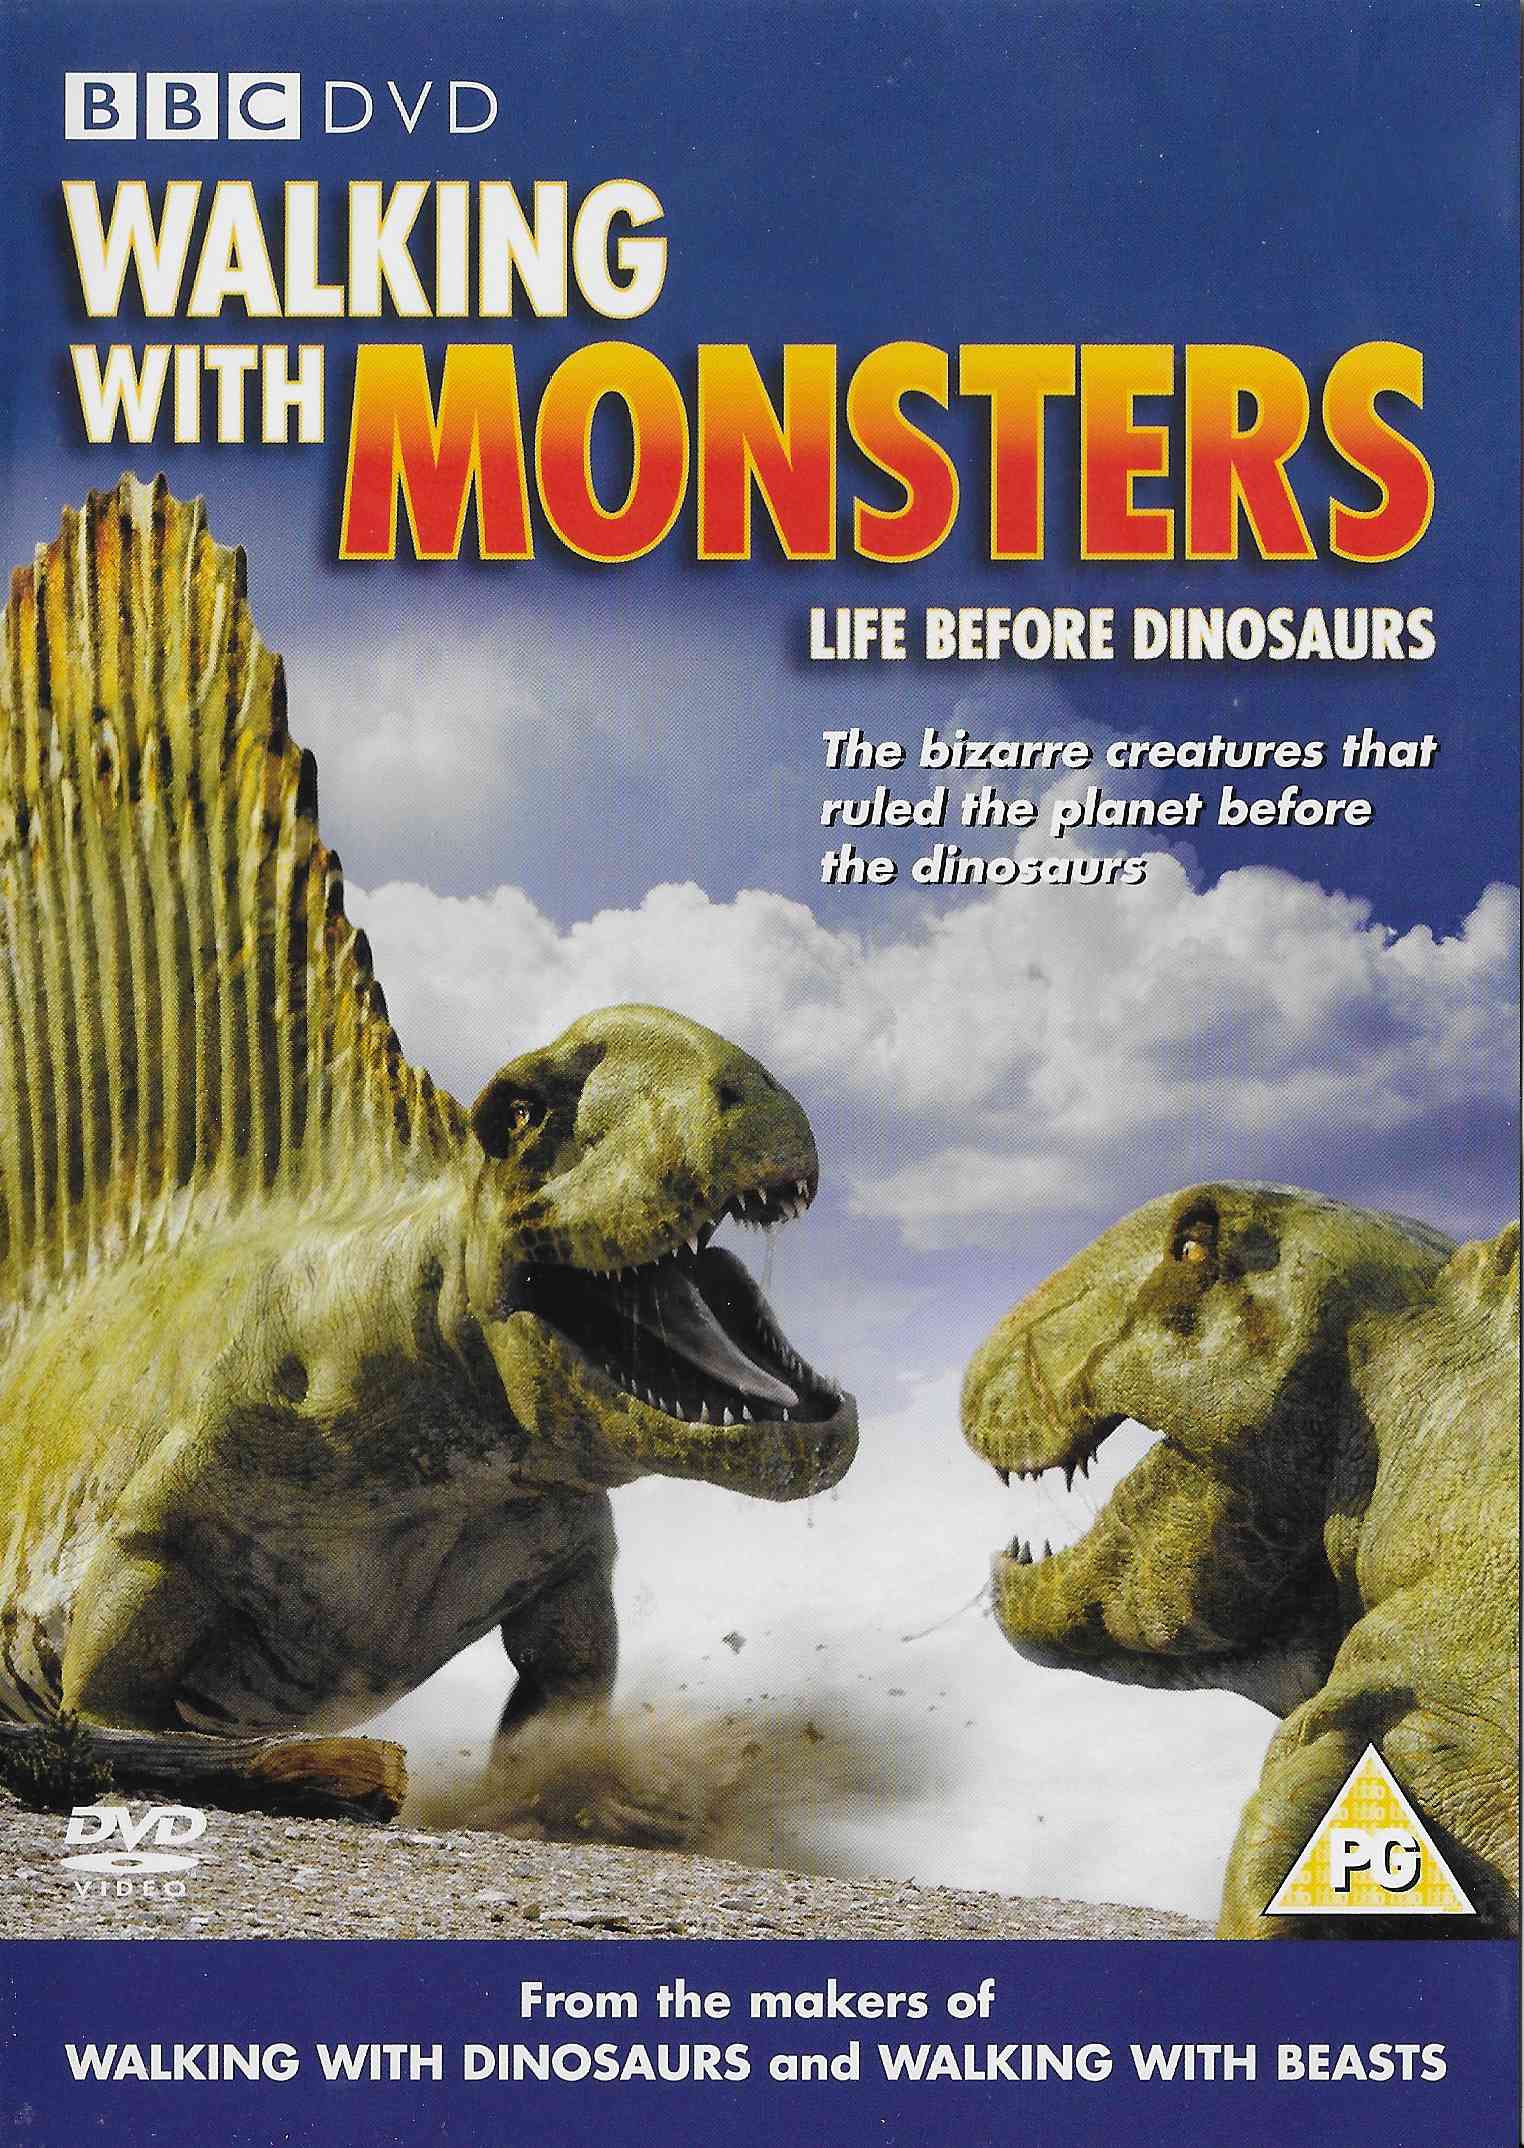 Picture of BBCDVD 1750 Walking with monsters by artist  from the BBC dvds - Records and Tapes library